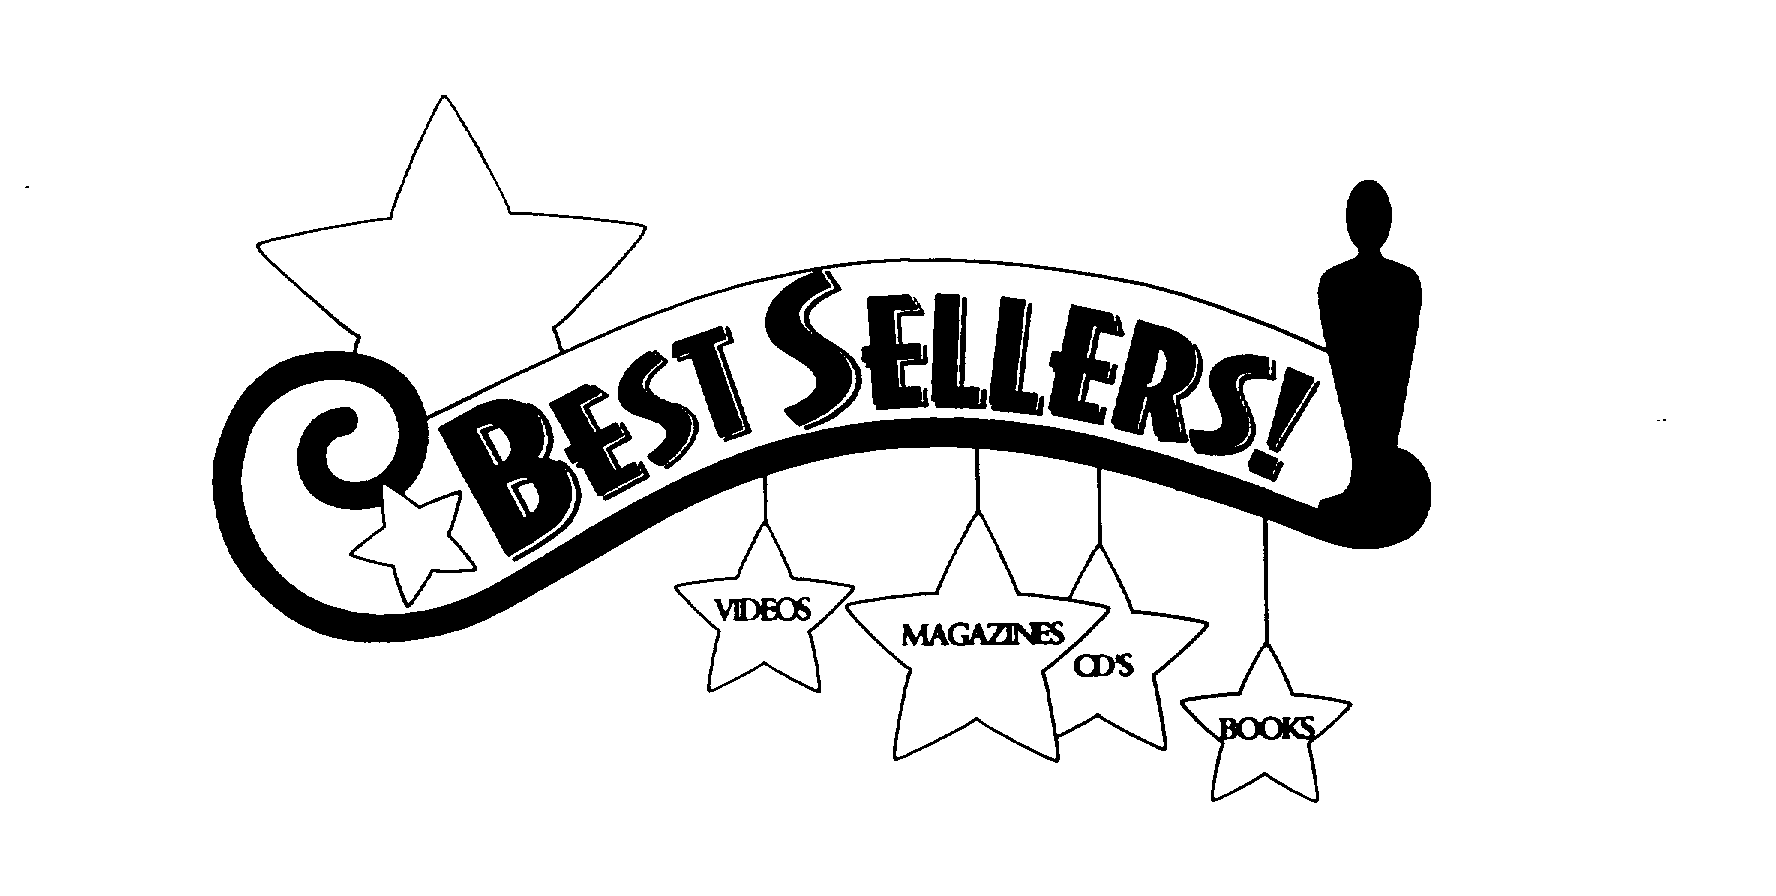  BEST SELLERS! VIDEOS MAGAZINES CD'S BOOKS